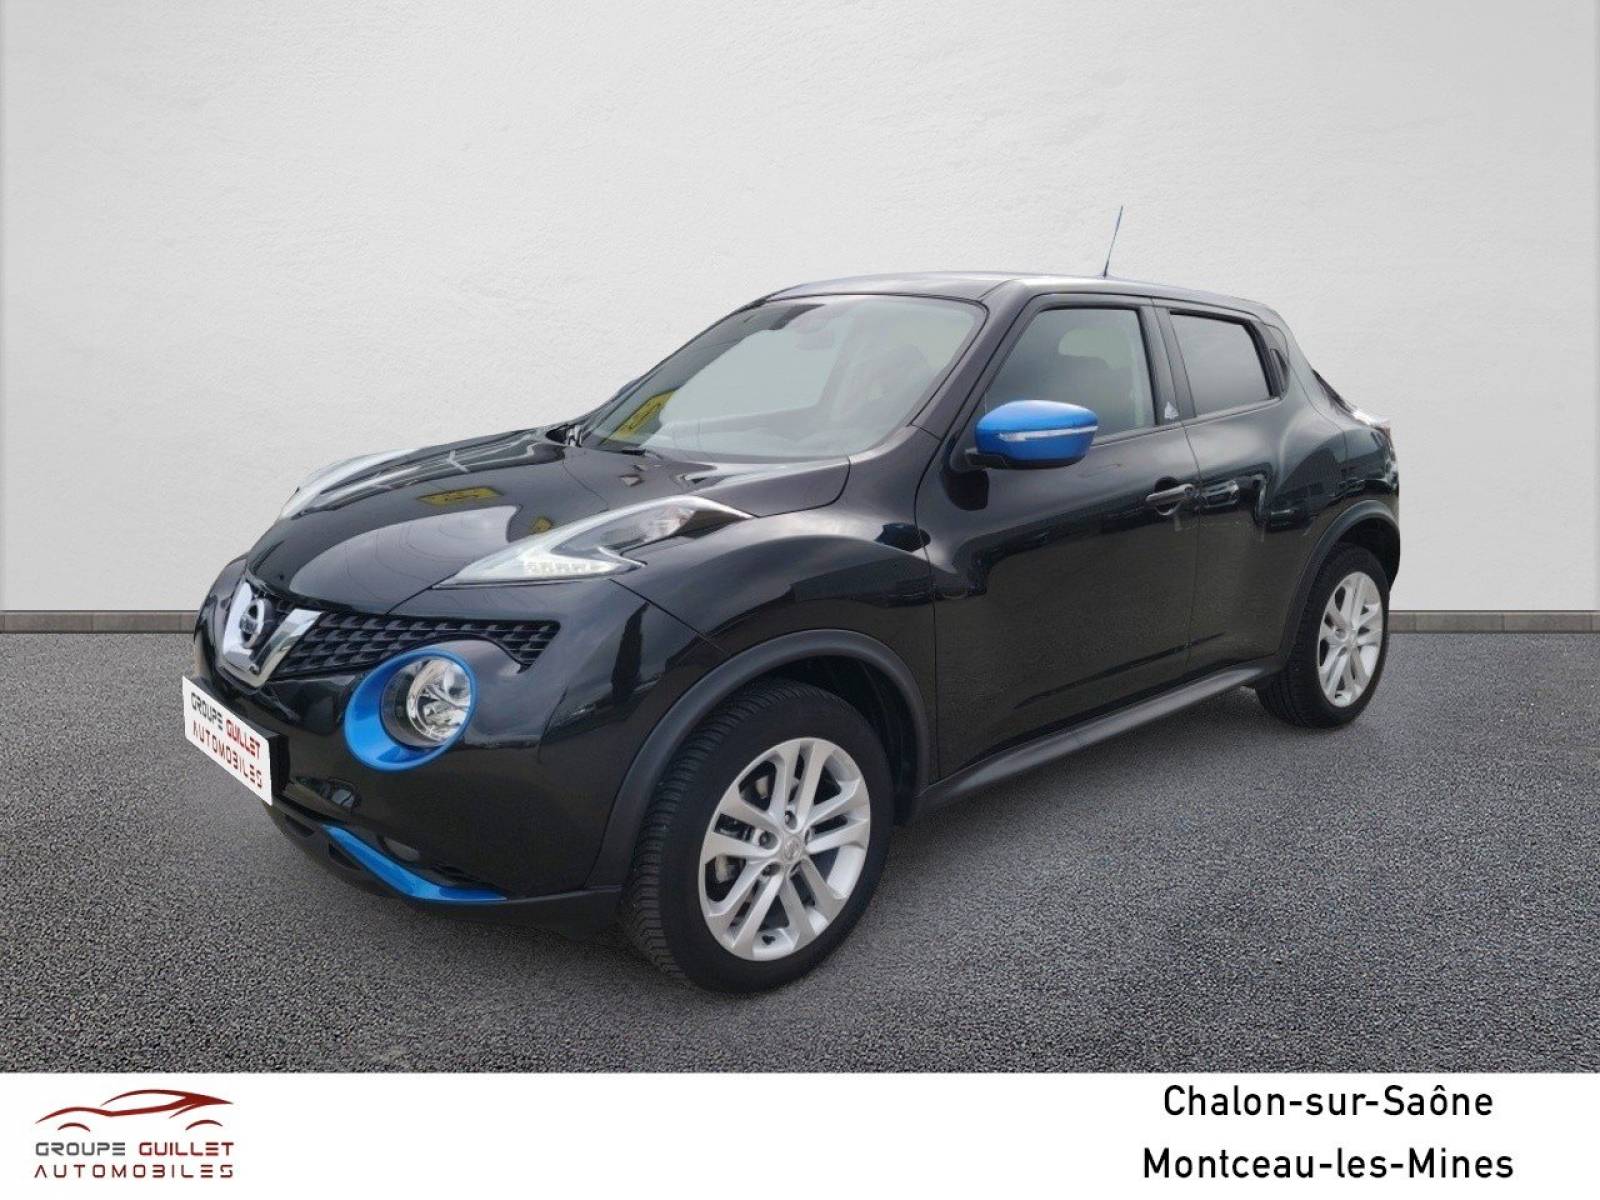 NISSAN Juke 1.2e DIG-T 115 Start/Stop System - véhicule d'occasion - Groupe Guillet - Opel Magicauto Chalon - 71380 - Saint-Marcel - 1